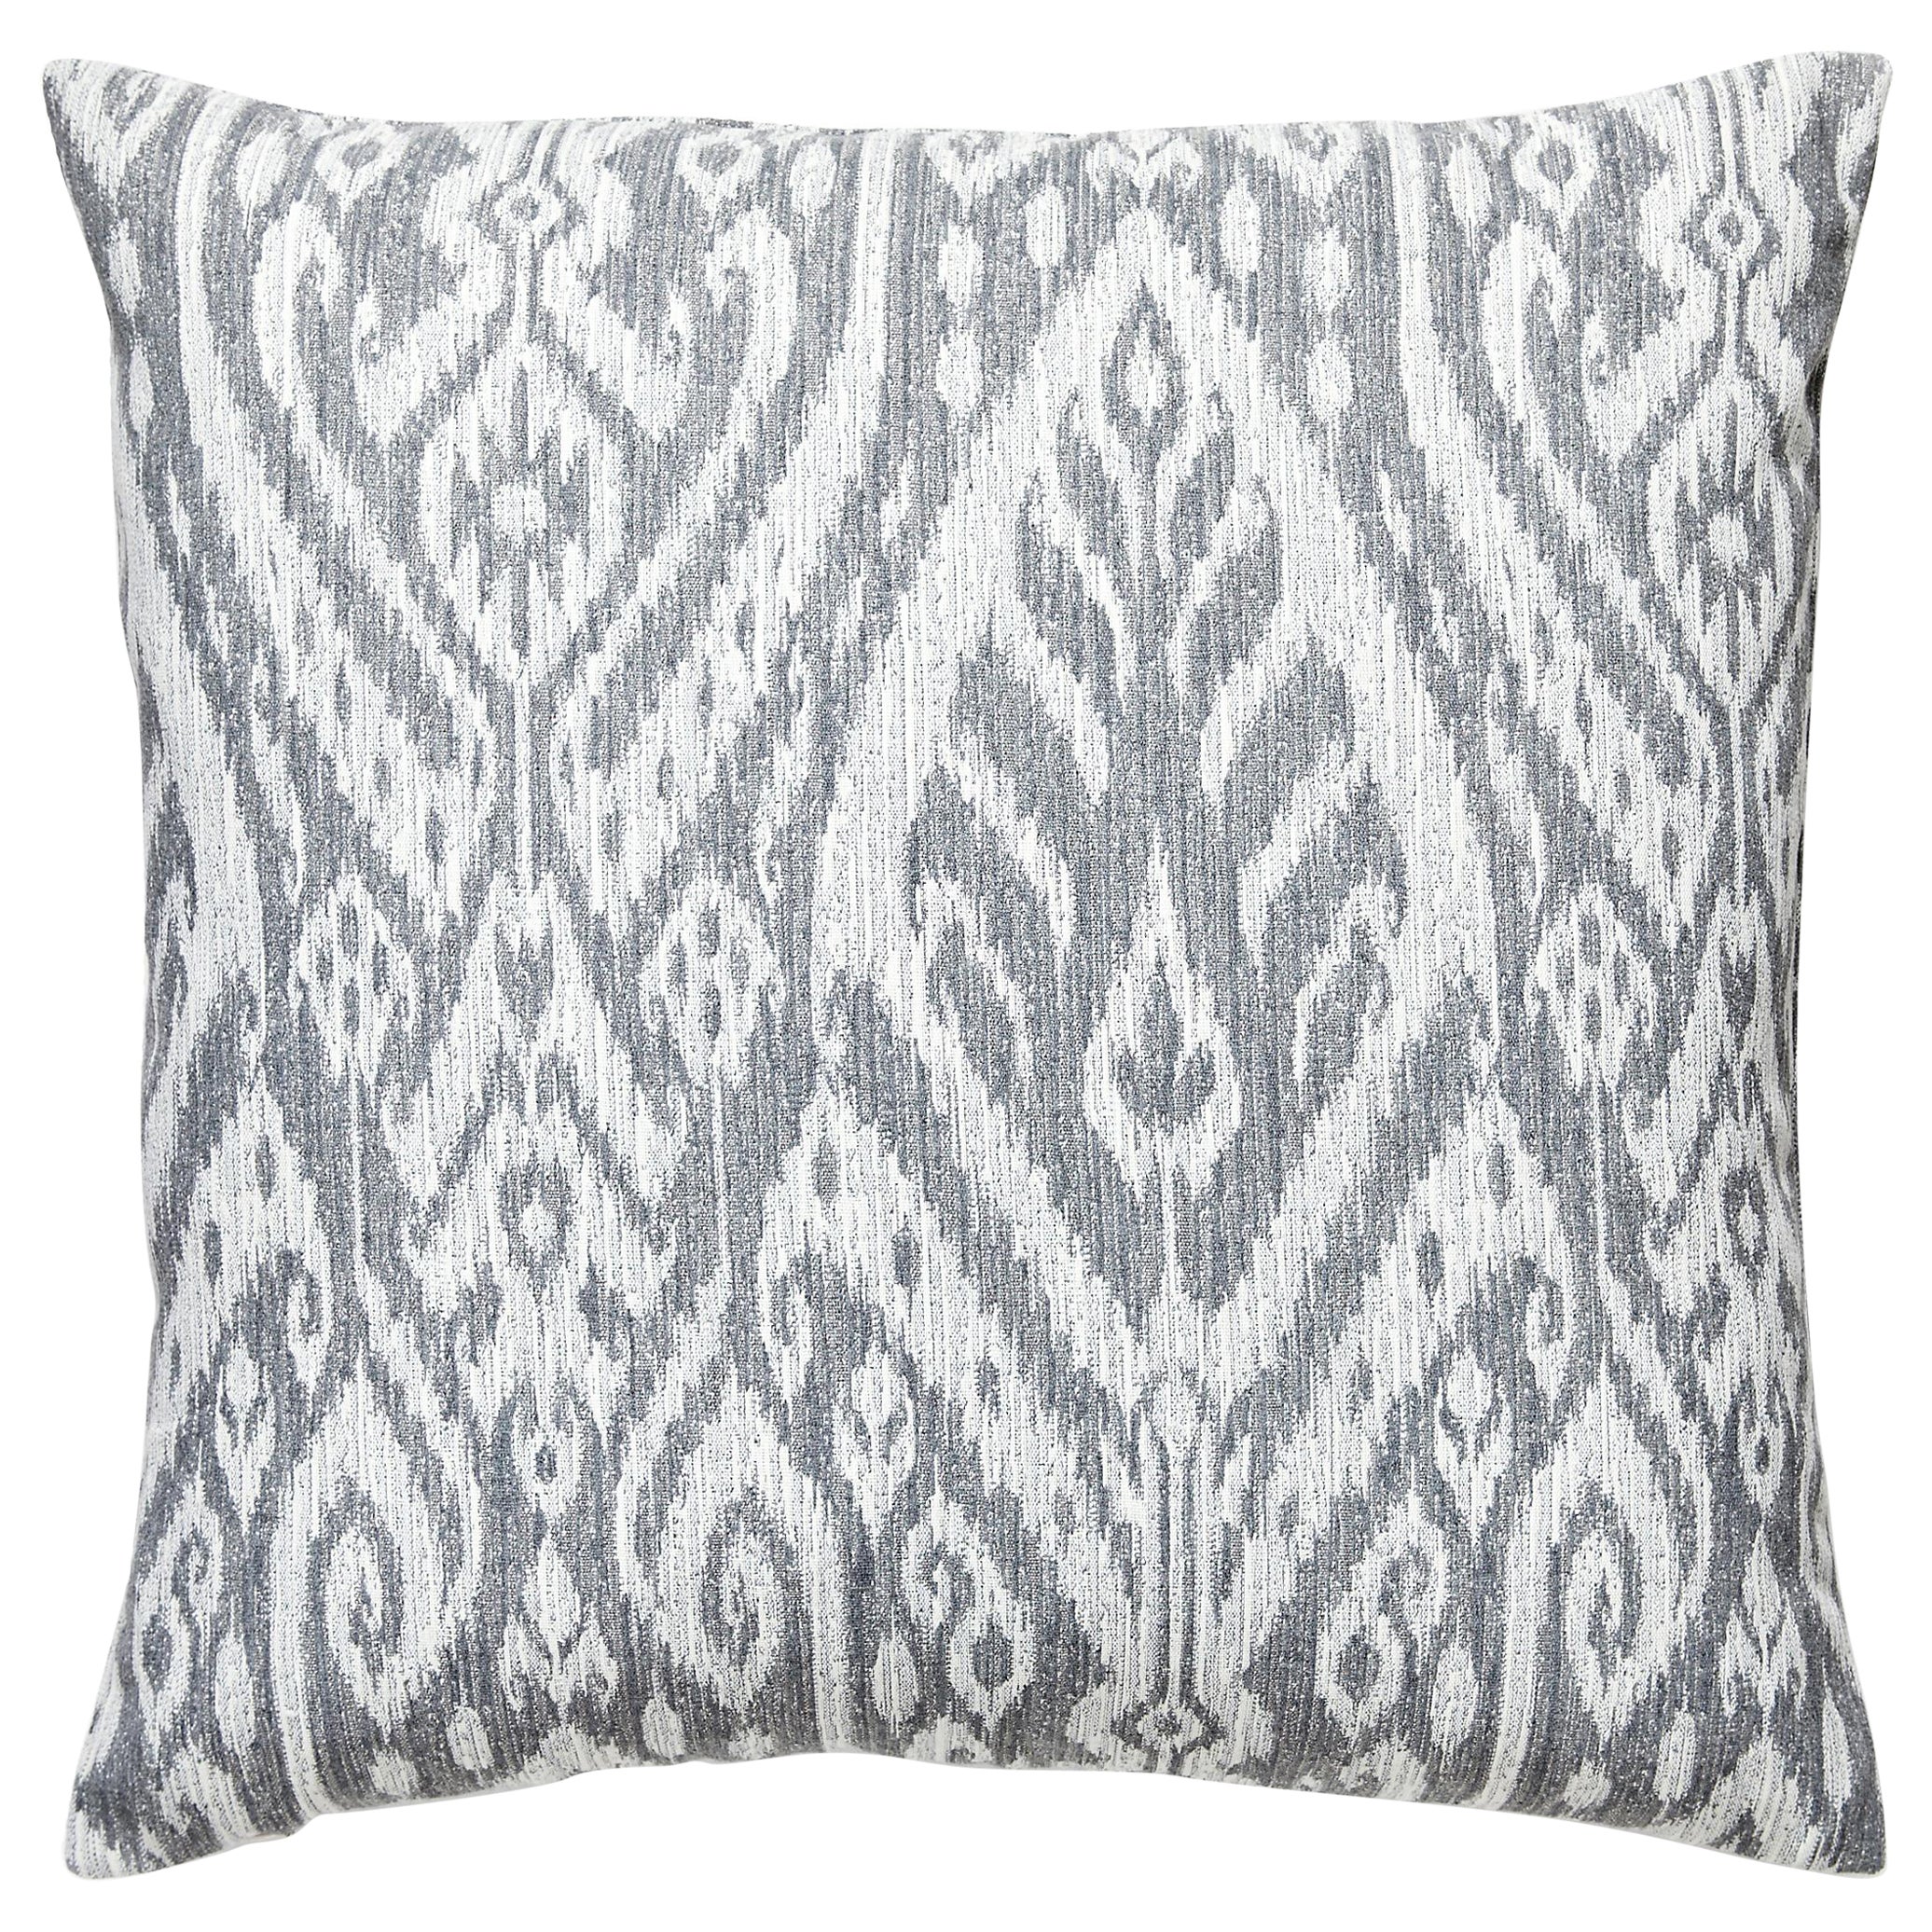 Borneo Ikat Outdoor Pillow For Sale